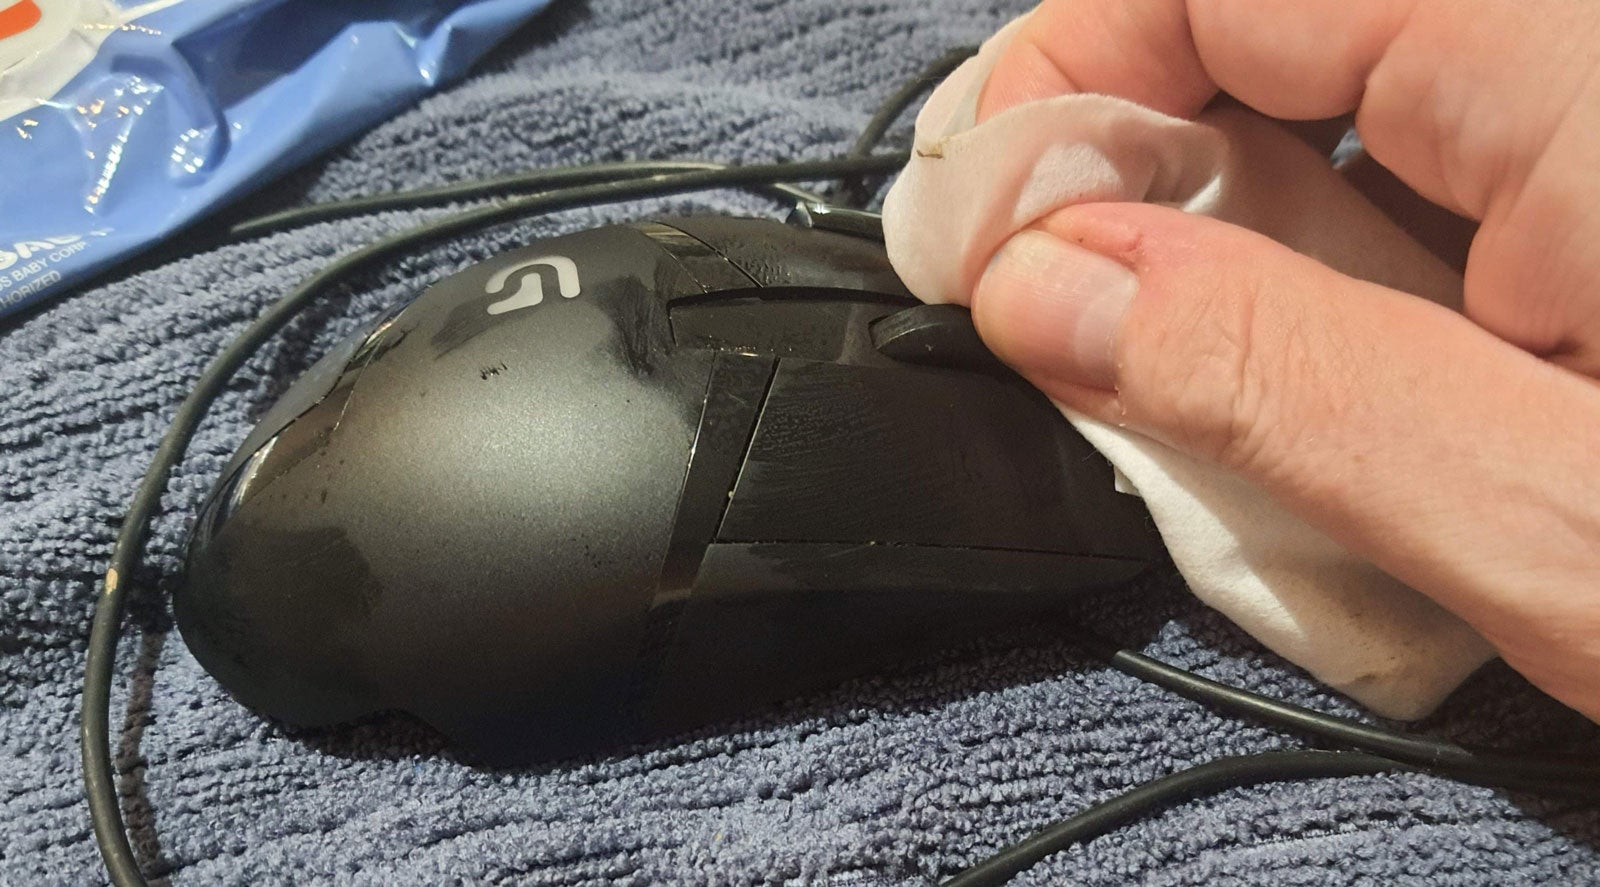 Your gaming mouse may not be working properly because it needs to be cleaned.